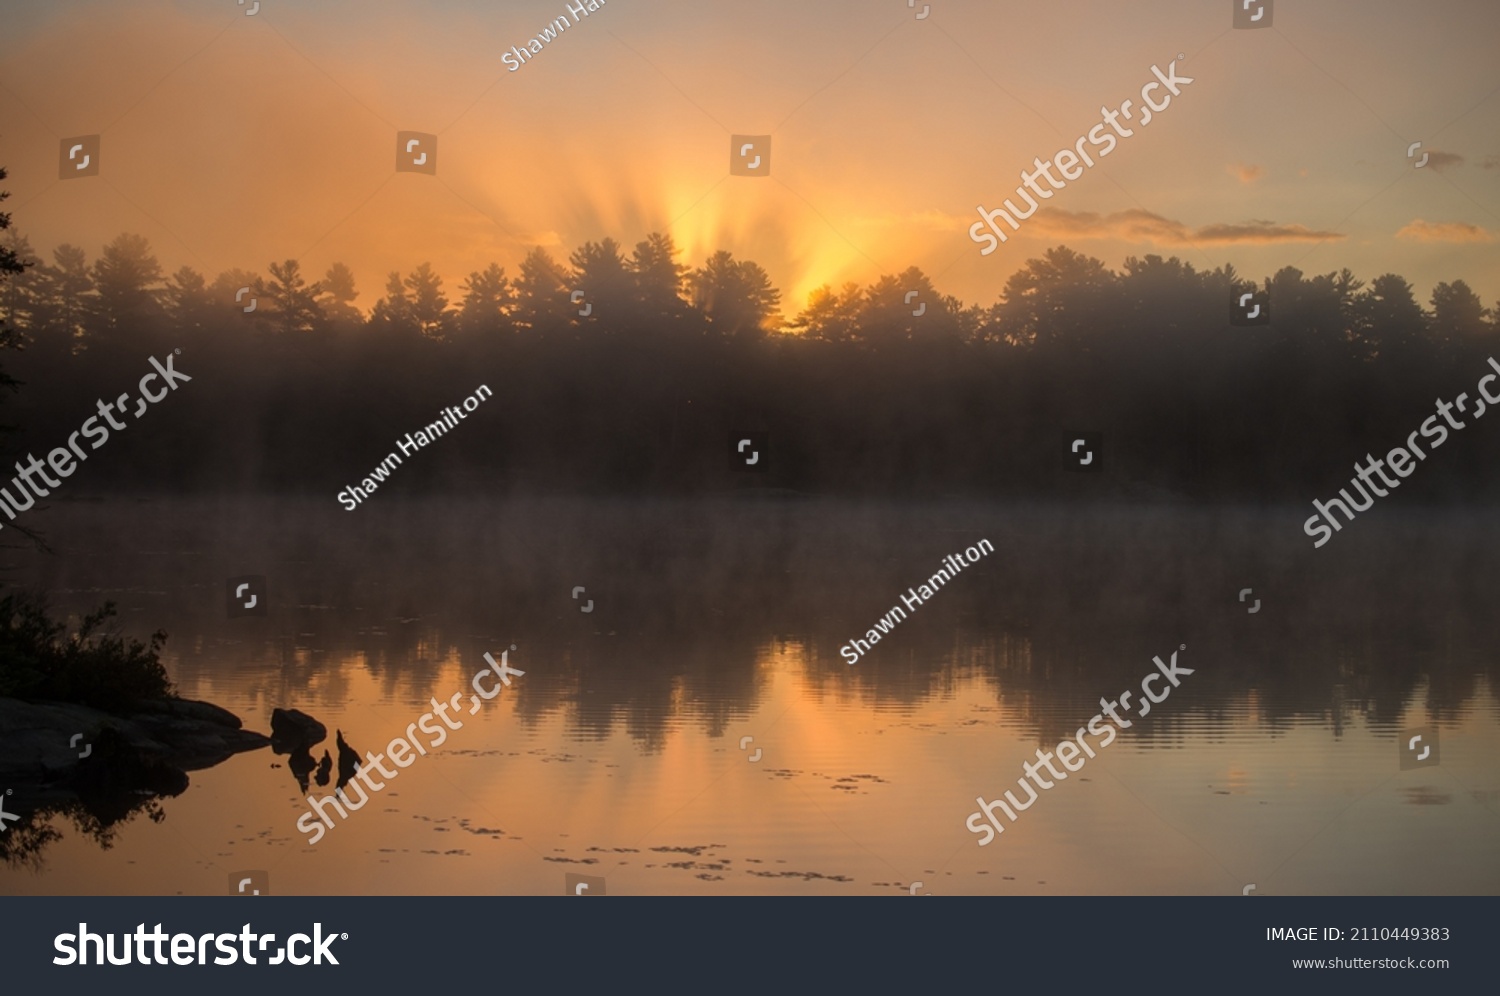 sunrise or sunset behind trees with reflection on calm water of lake at dawn or dusk on lake in cottage country of Ontario horizontal format room for type natural backdrop background or wallpaper  #2110449383